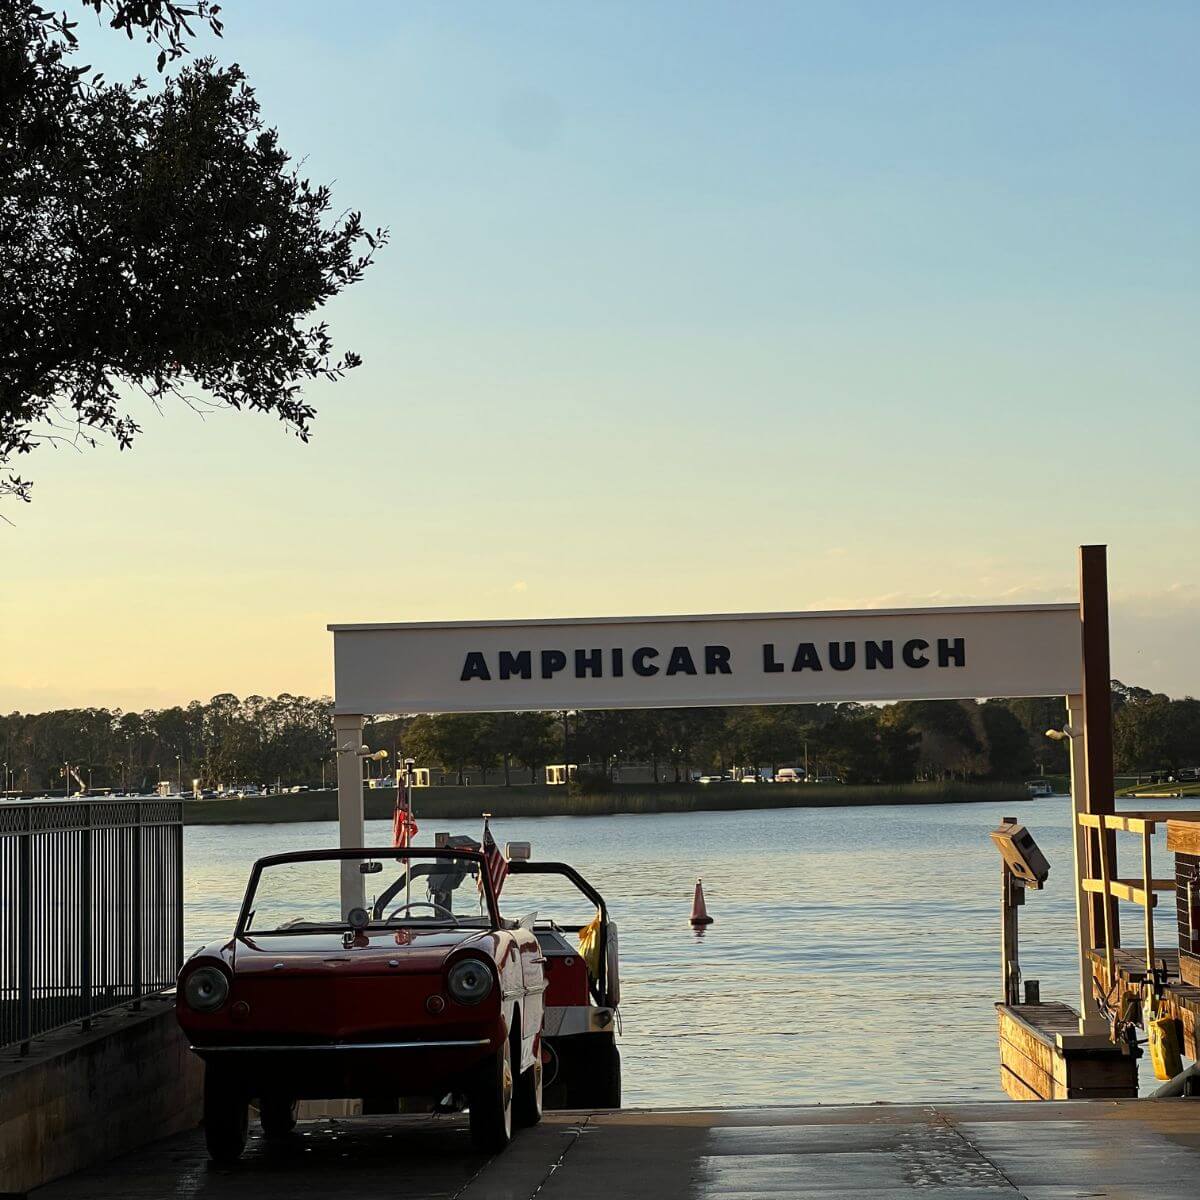 Photo of vintage amphicars parked at a dock that says "Amphicar Launch" on a banner.